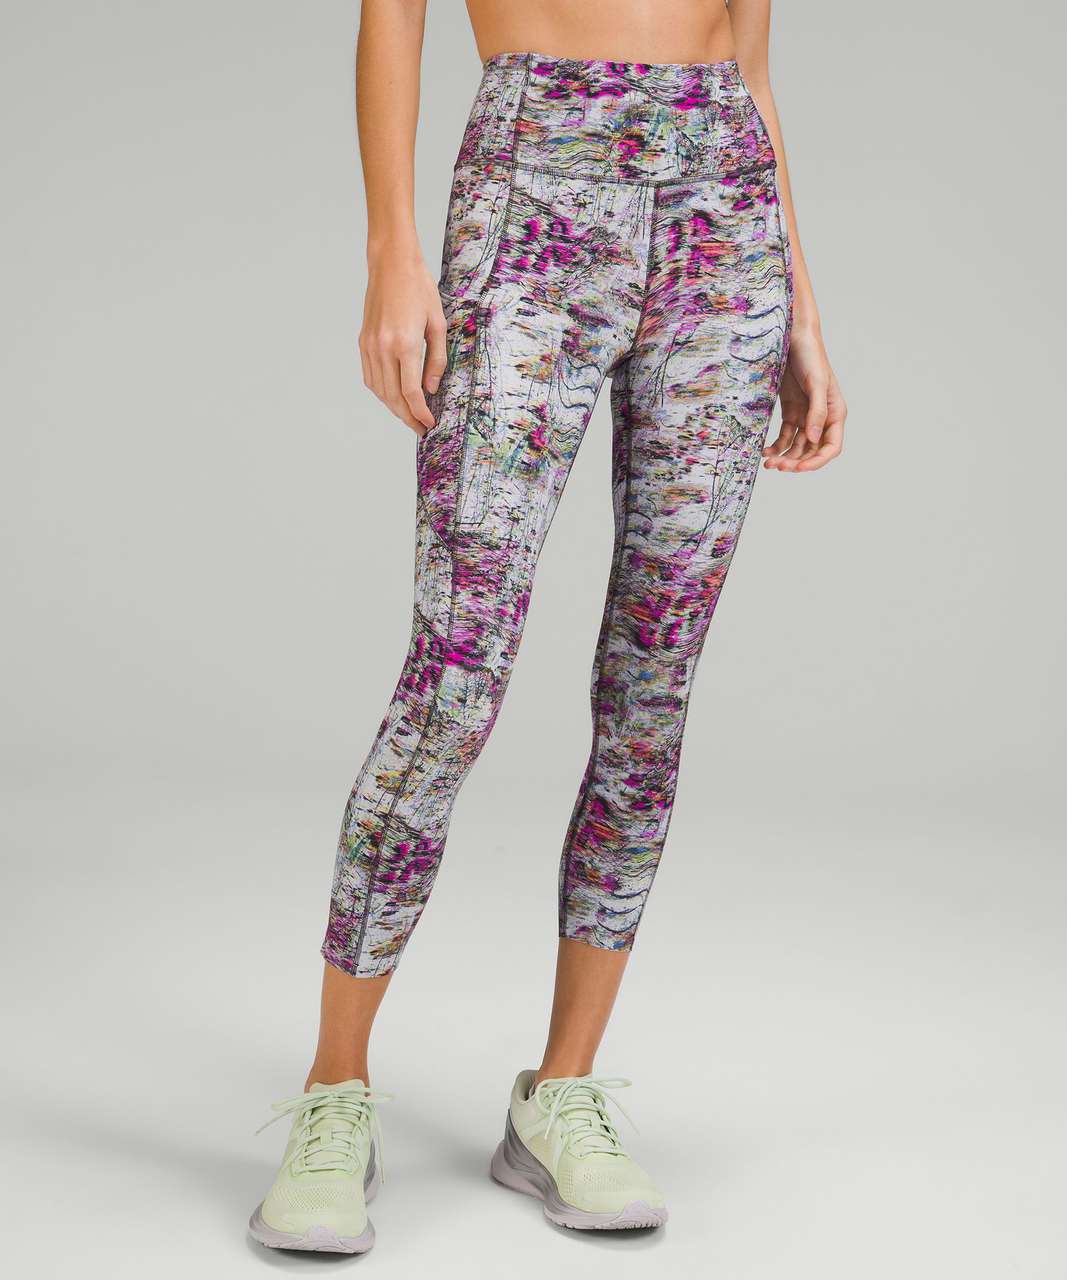 Lululemon Fast and Free High-Rise Crop 23" - Firework Floral Multi